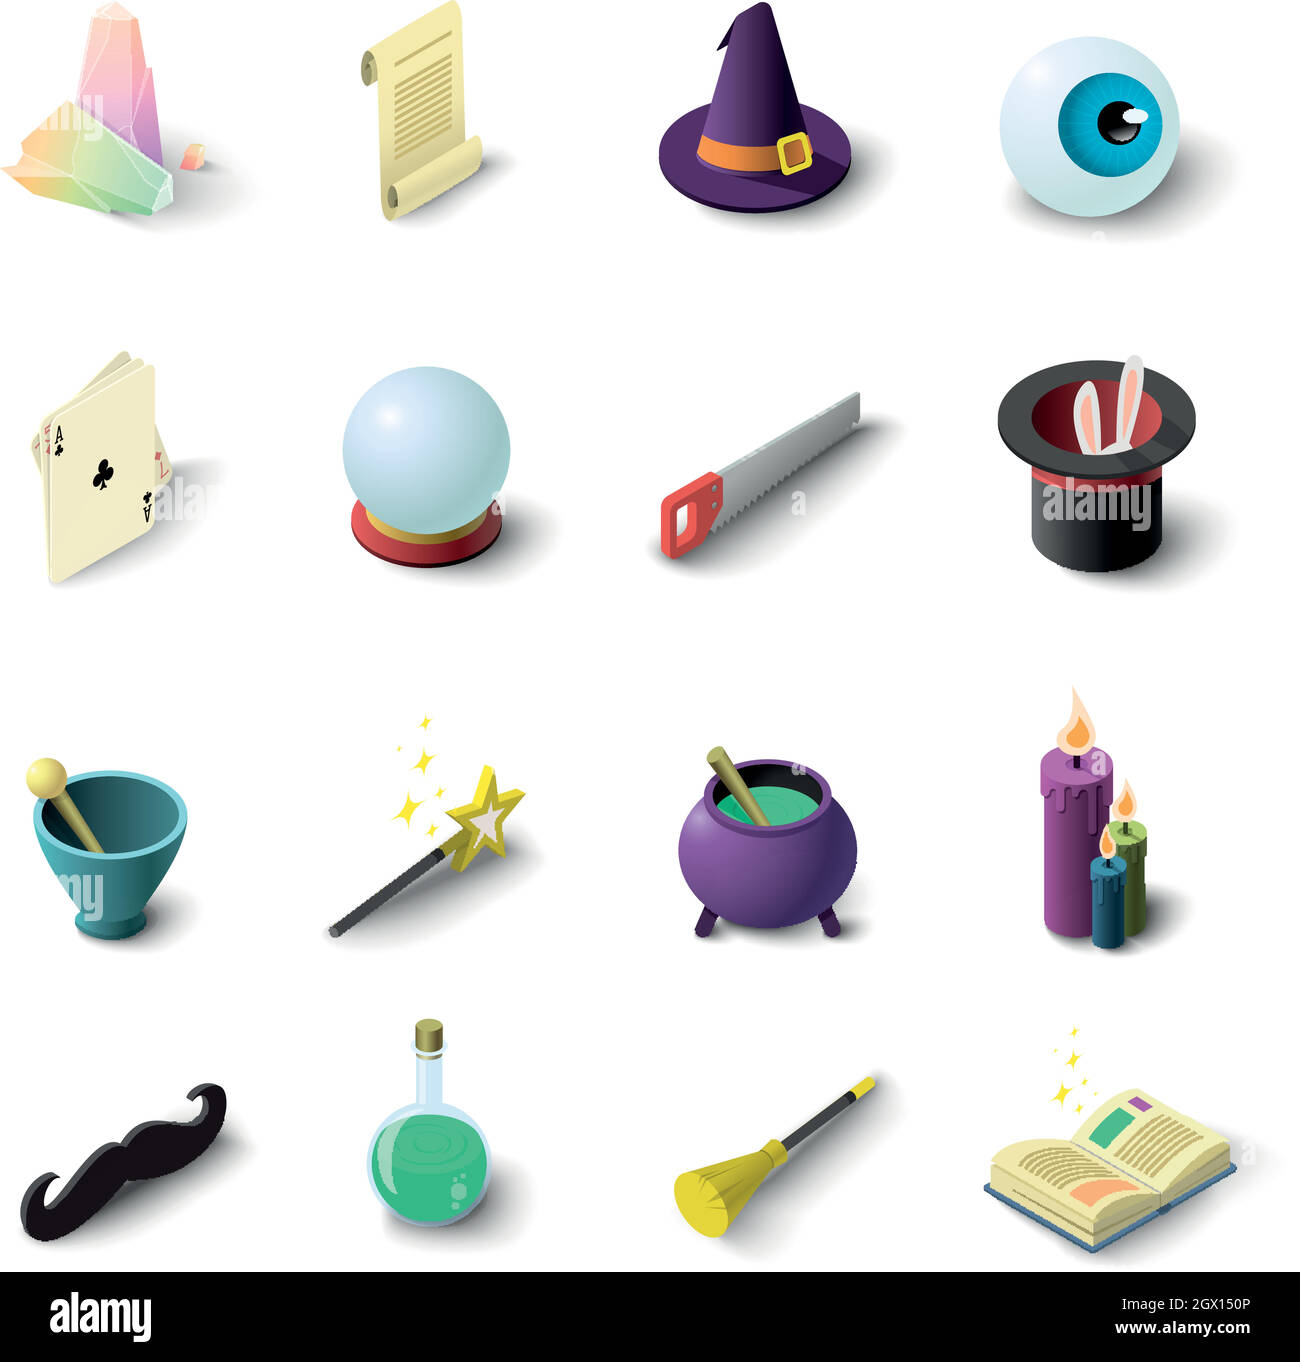 2,289 Videogame Drawing Images, Stock Photos, 3D objects, & Vectors